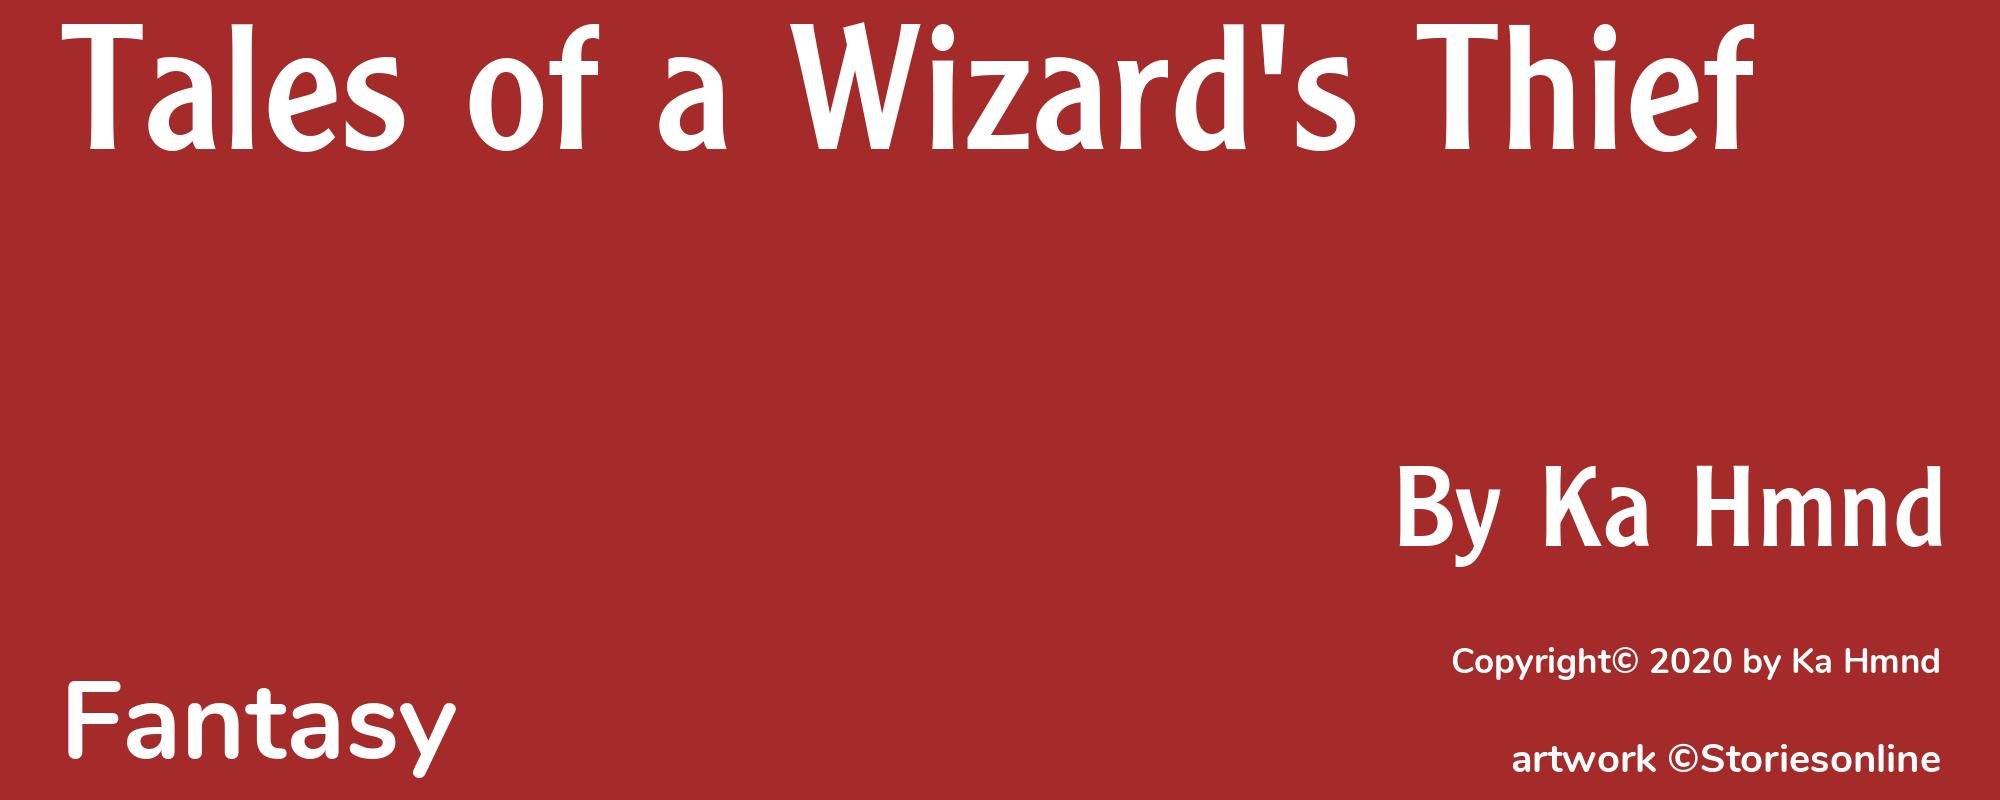 Tales of a Wizard's Thief - Cover